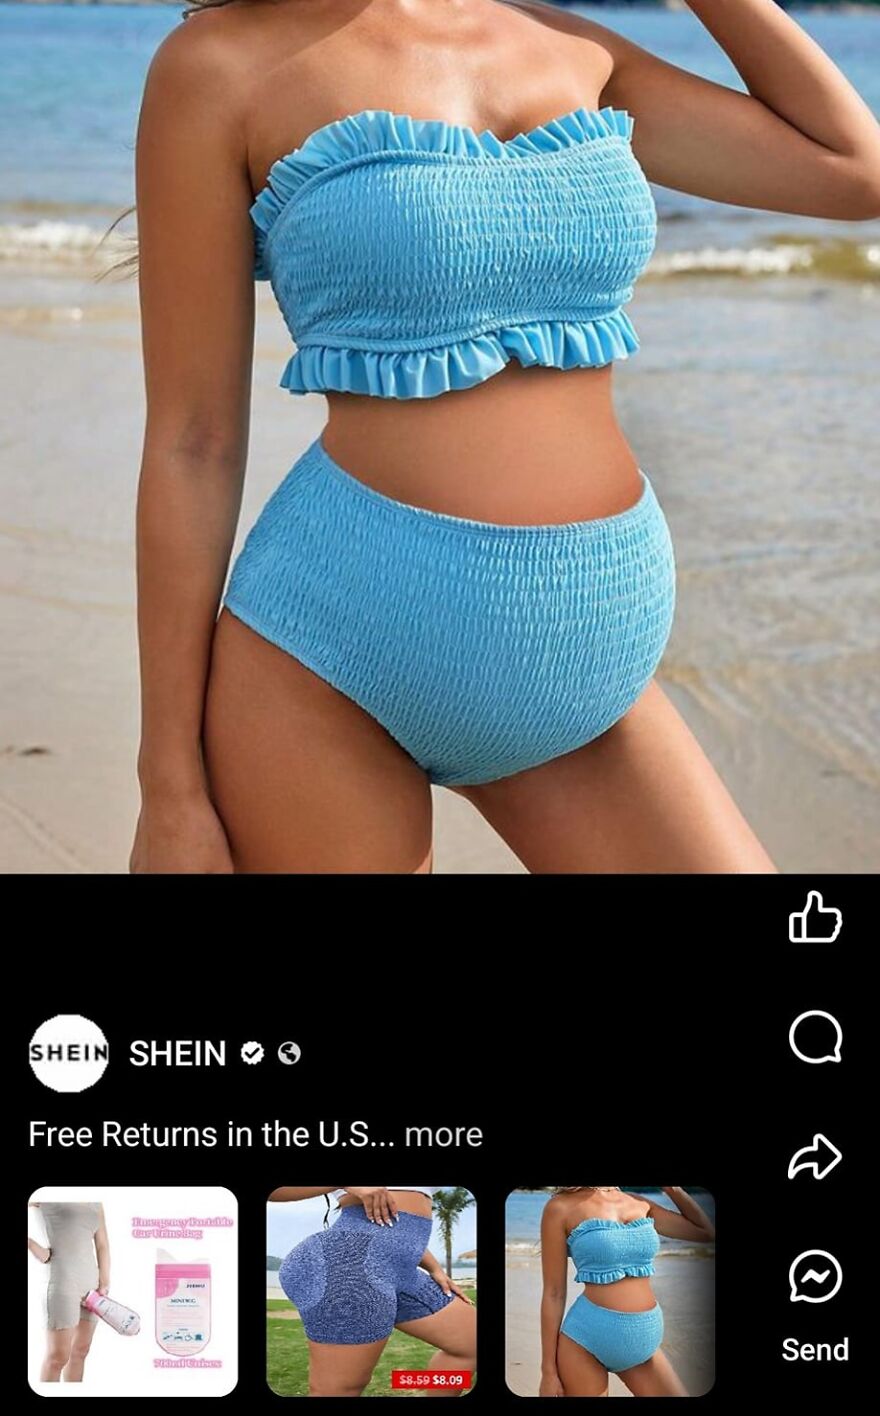 I'm Not Sure What's Worse: The Portable Urinal, The Fake Butt, Or The Bulbous Swimsuit. The Bikini Bottoms Look Like Diapers